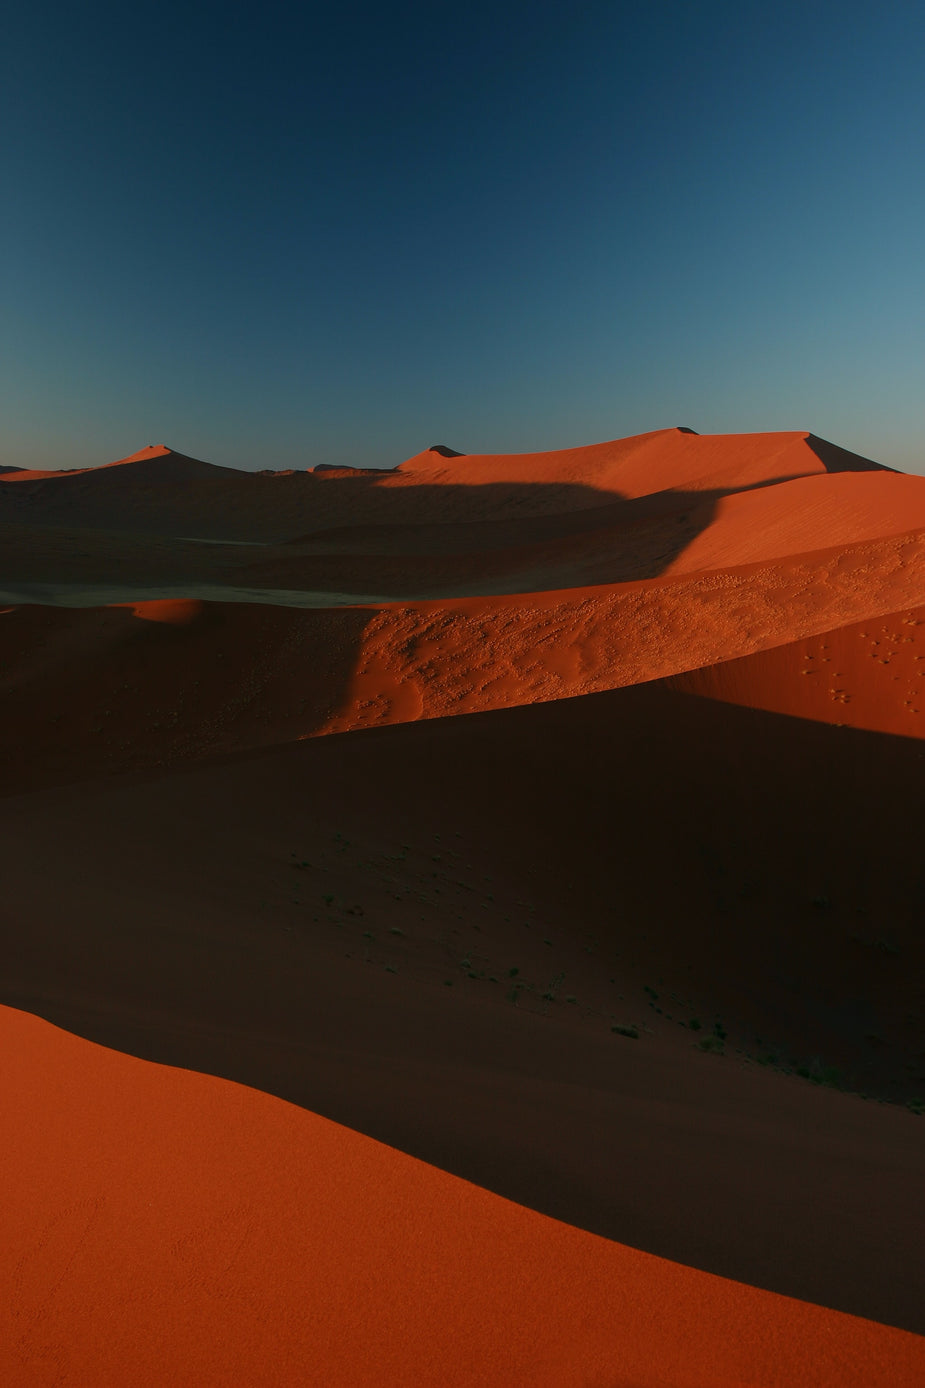 Browse Free HD Images of Rust Colored Sand Dunes Against A Deep Blue Sky